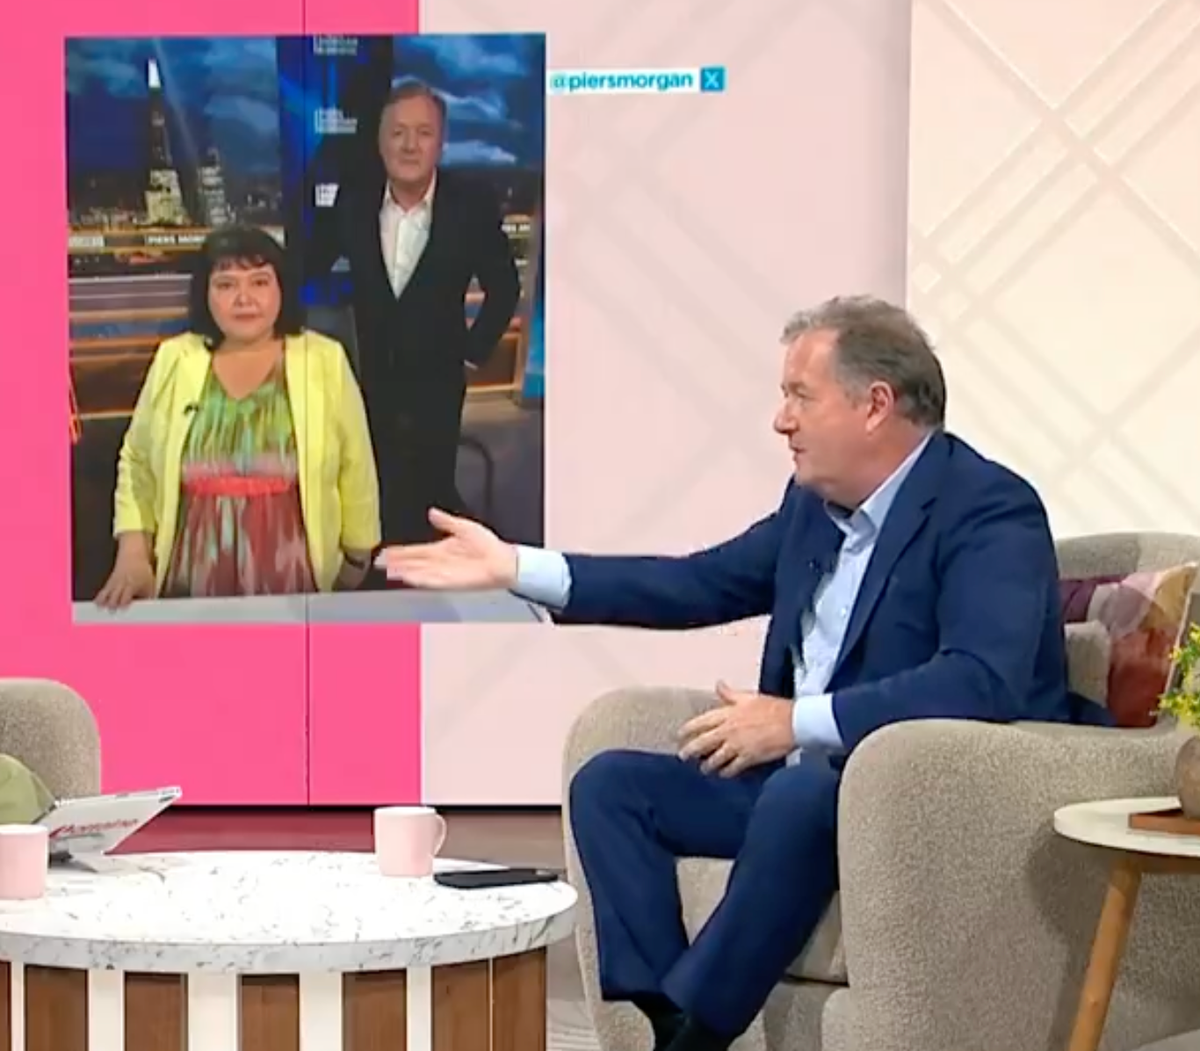 Morgan spoke out in defence of the controversial interview on ITV’s Lorraine (ITV)